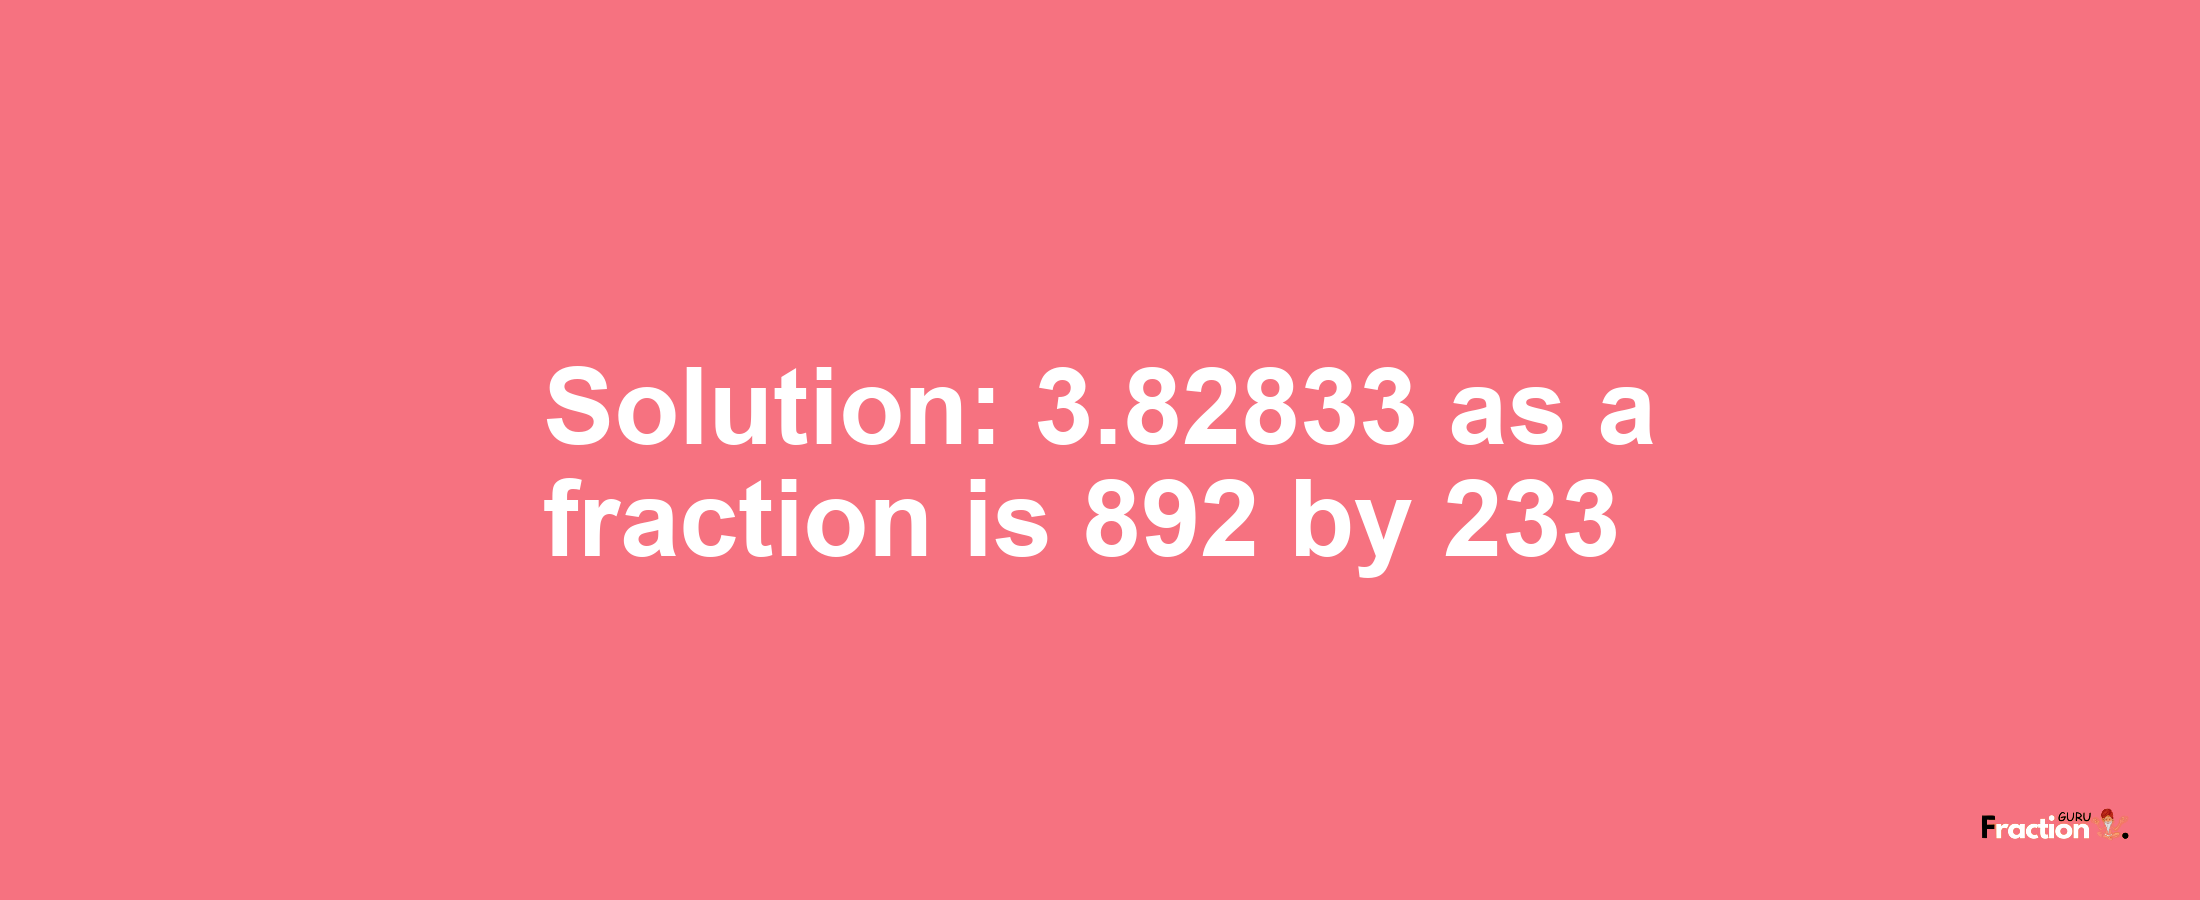 Solution:3.82833 as a fraction is 892/233